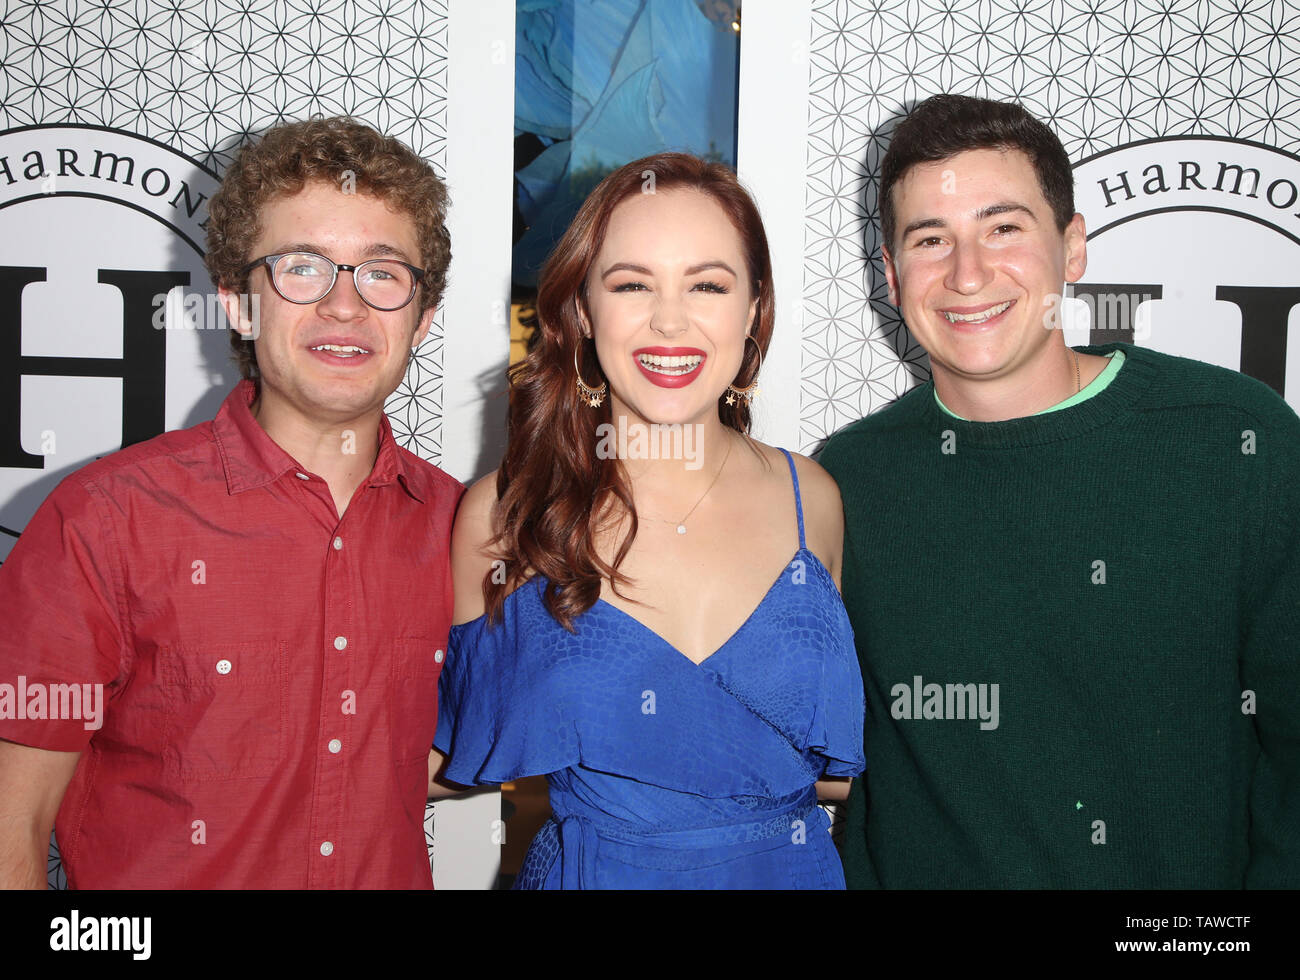 Los Angeles, Ca, USA. 28th May, 2019. Sean Giambrone, Hayley Orrantia, Sam Lerner, at Hayley Orrantia Celebrates New EP 'The Way Out' at The Harmonist on May 23, 2019 in Los Angeles., California on May 28, 2019. Credit: Faye Sadou/Media Punch/Alamy Live News Stock Photo